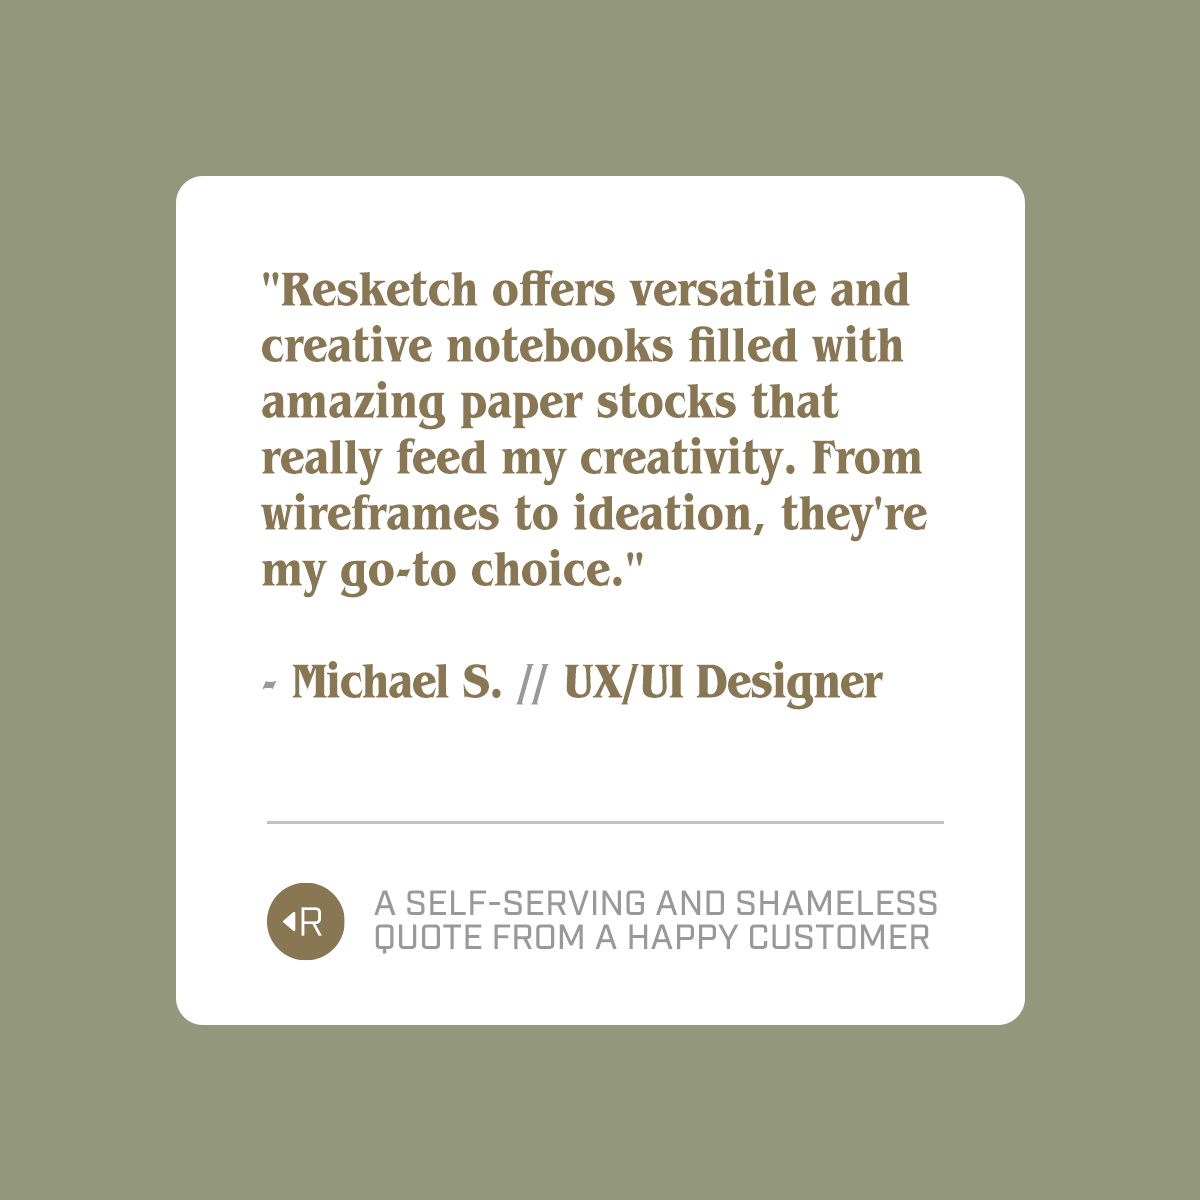 A Shameless, Self-Serving Quote from A Happy Customer! // #Paper #GreenLiving #EcoFriendlyProducts #Sustainable #ZeroWaste #Recycle #Upcycled #EcoFriendly #Stationery #SaveTheTrees #Resketch #Creative #Creativity #Artist #Notebook #Journal #Notes #Sketchbook #UXdesign